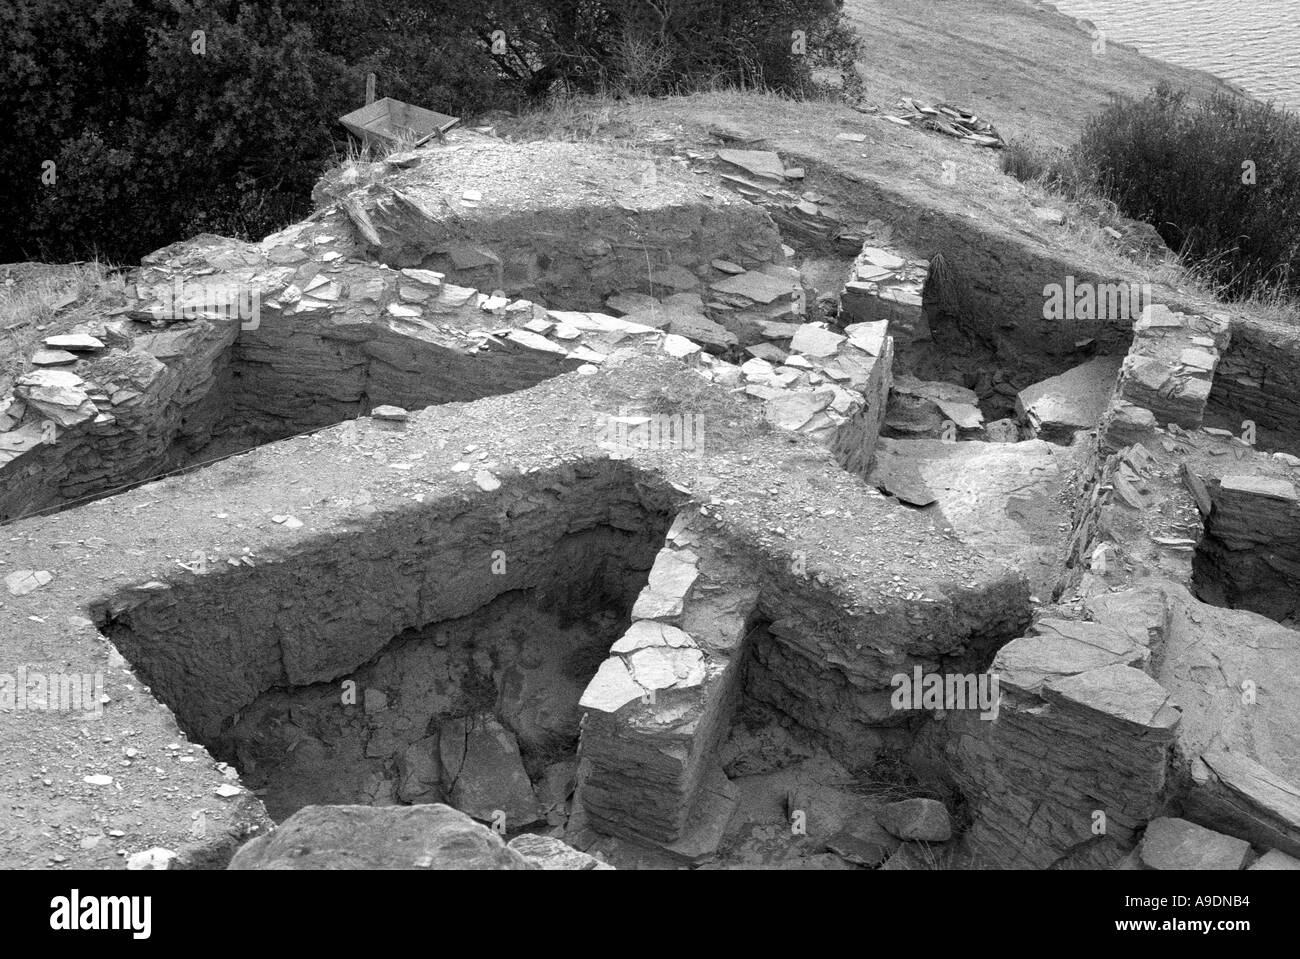 Roman ruins close to the Guadiana river before the construction of the Alqueva Dam Now this area is submerged by a 250 sq km lak Stock Photo